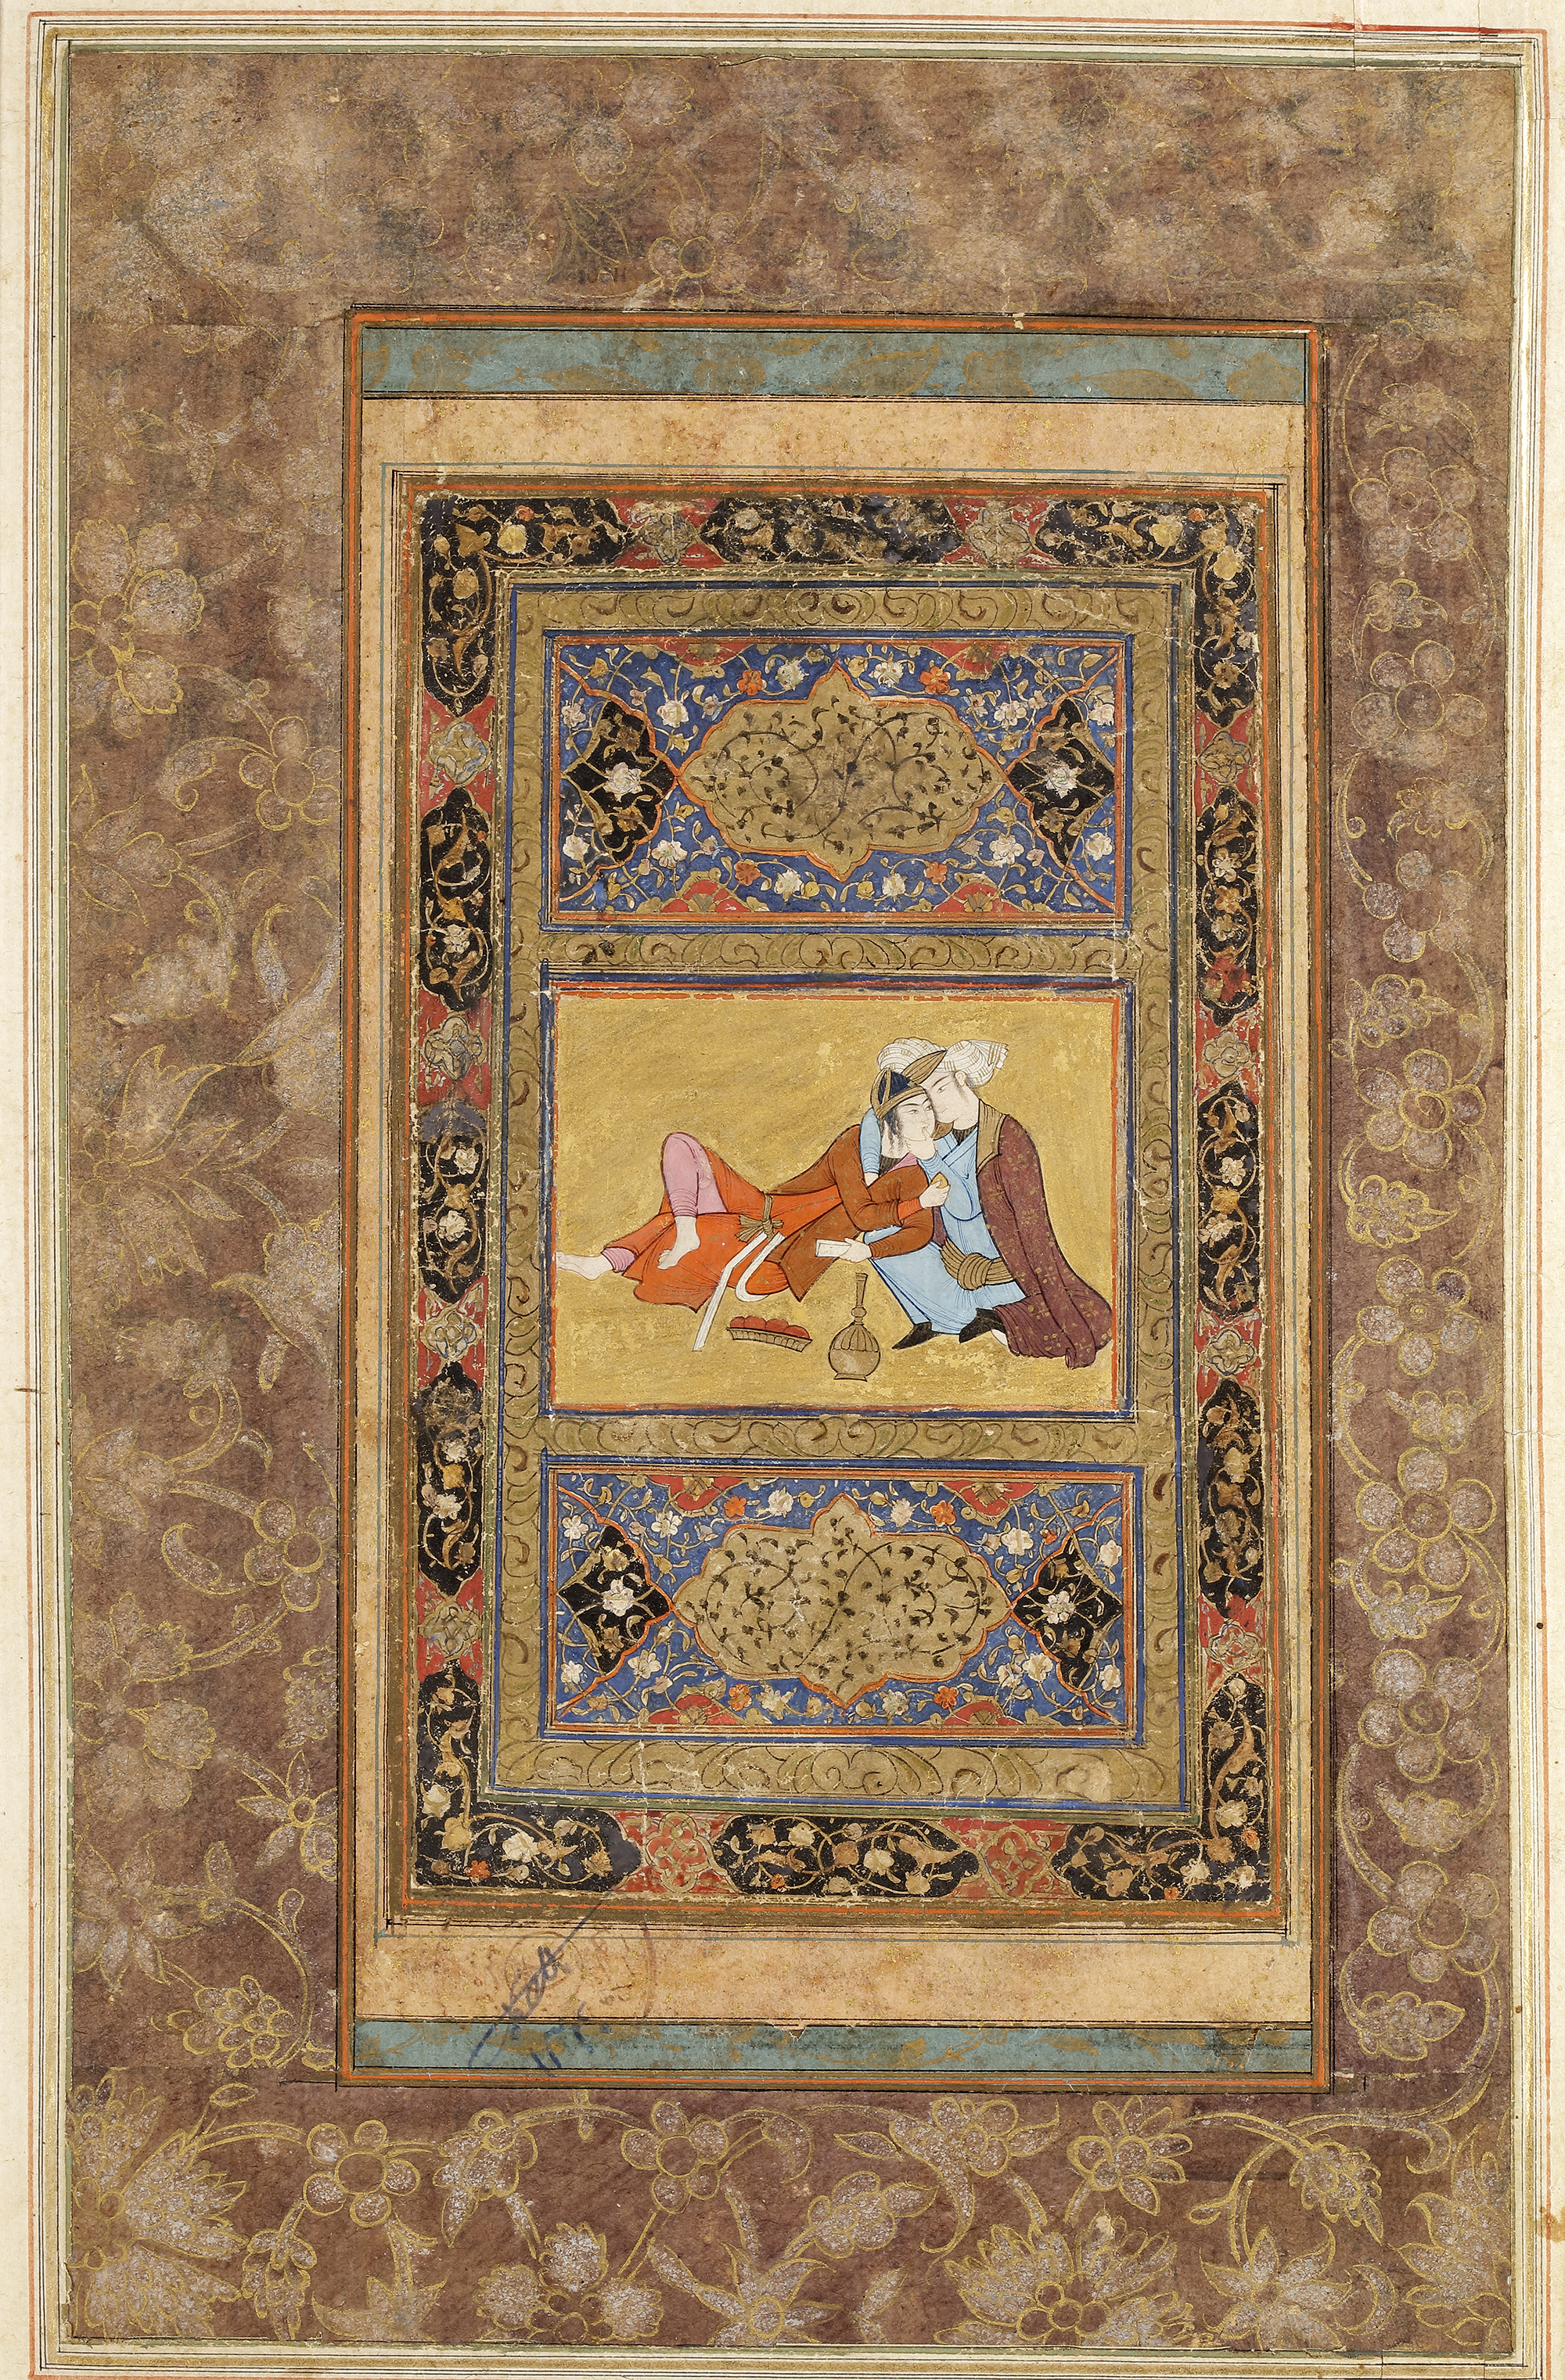 AN EMBRACING COUPLE, PERSIA, SAFAVID, 17TH CENTURY - Image 2 of 4